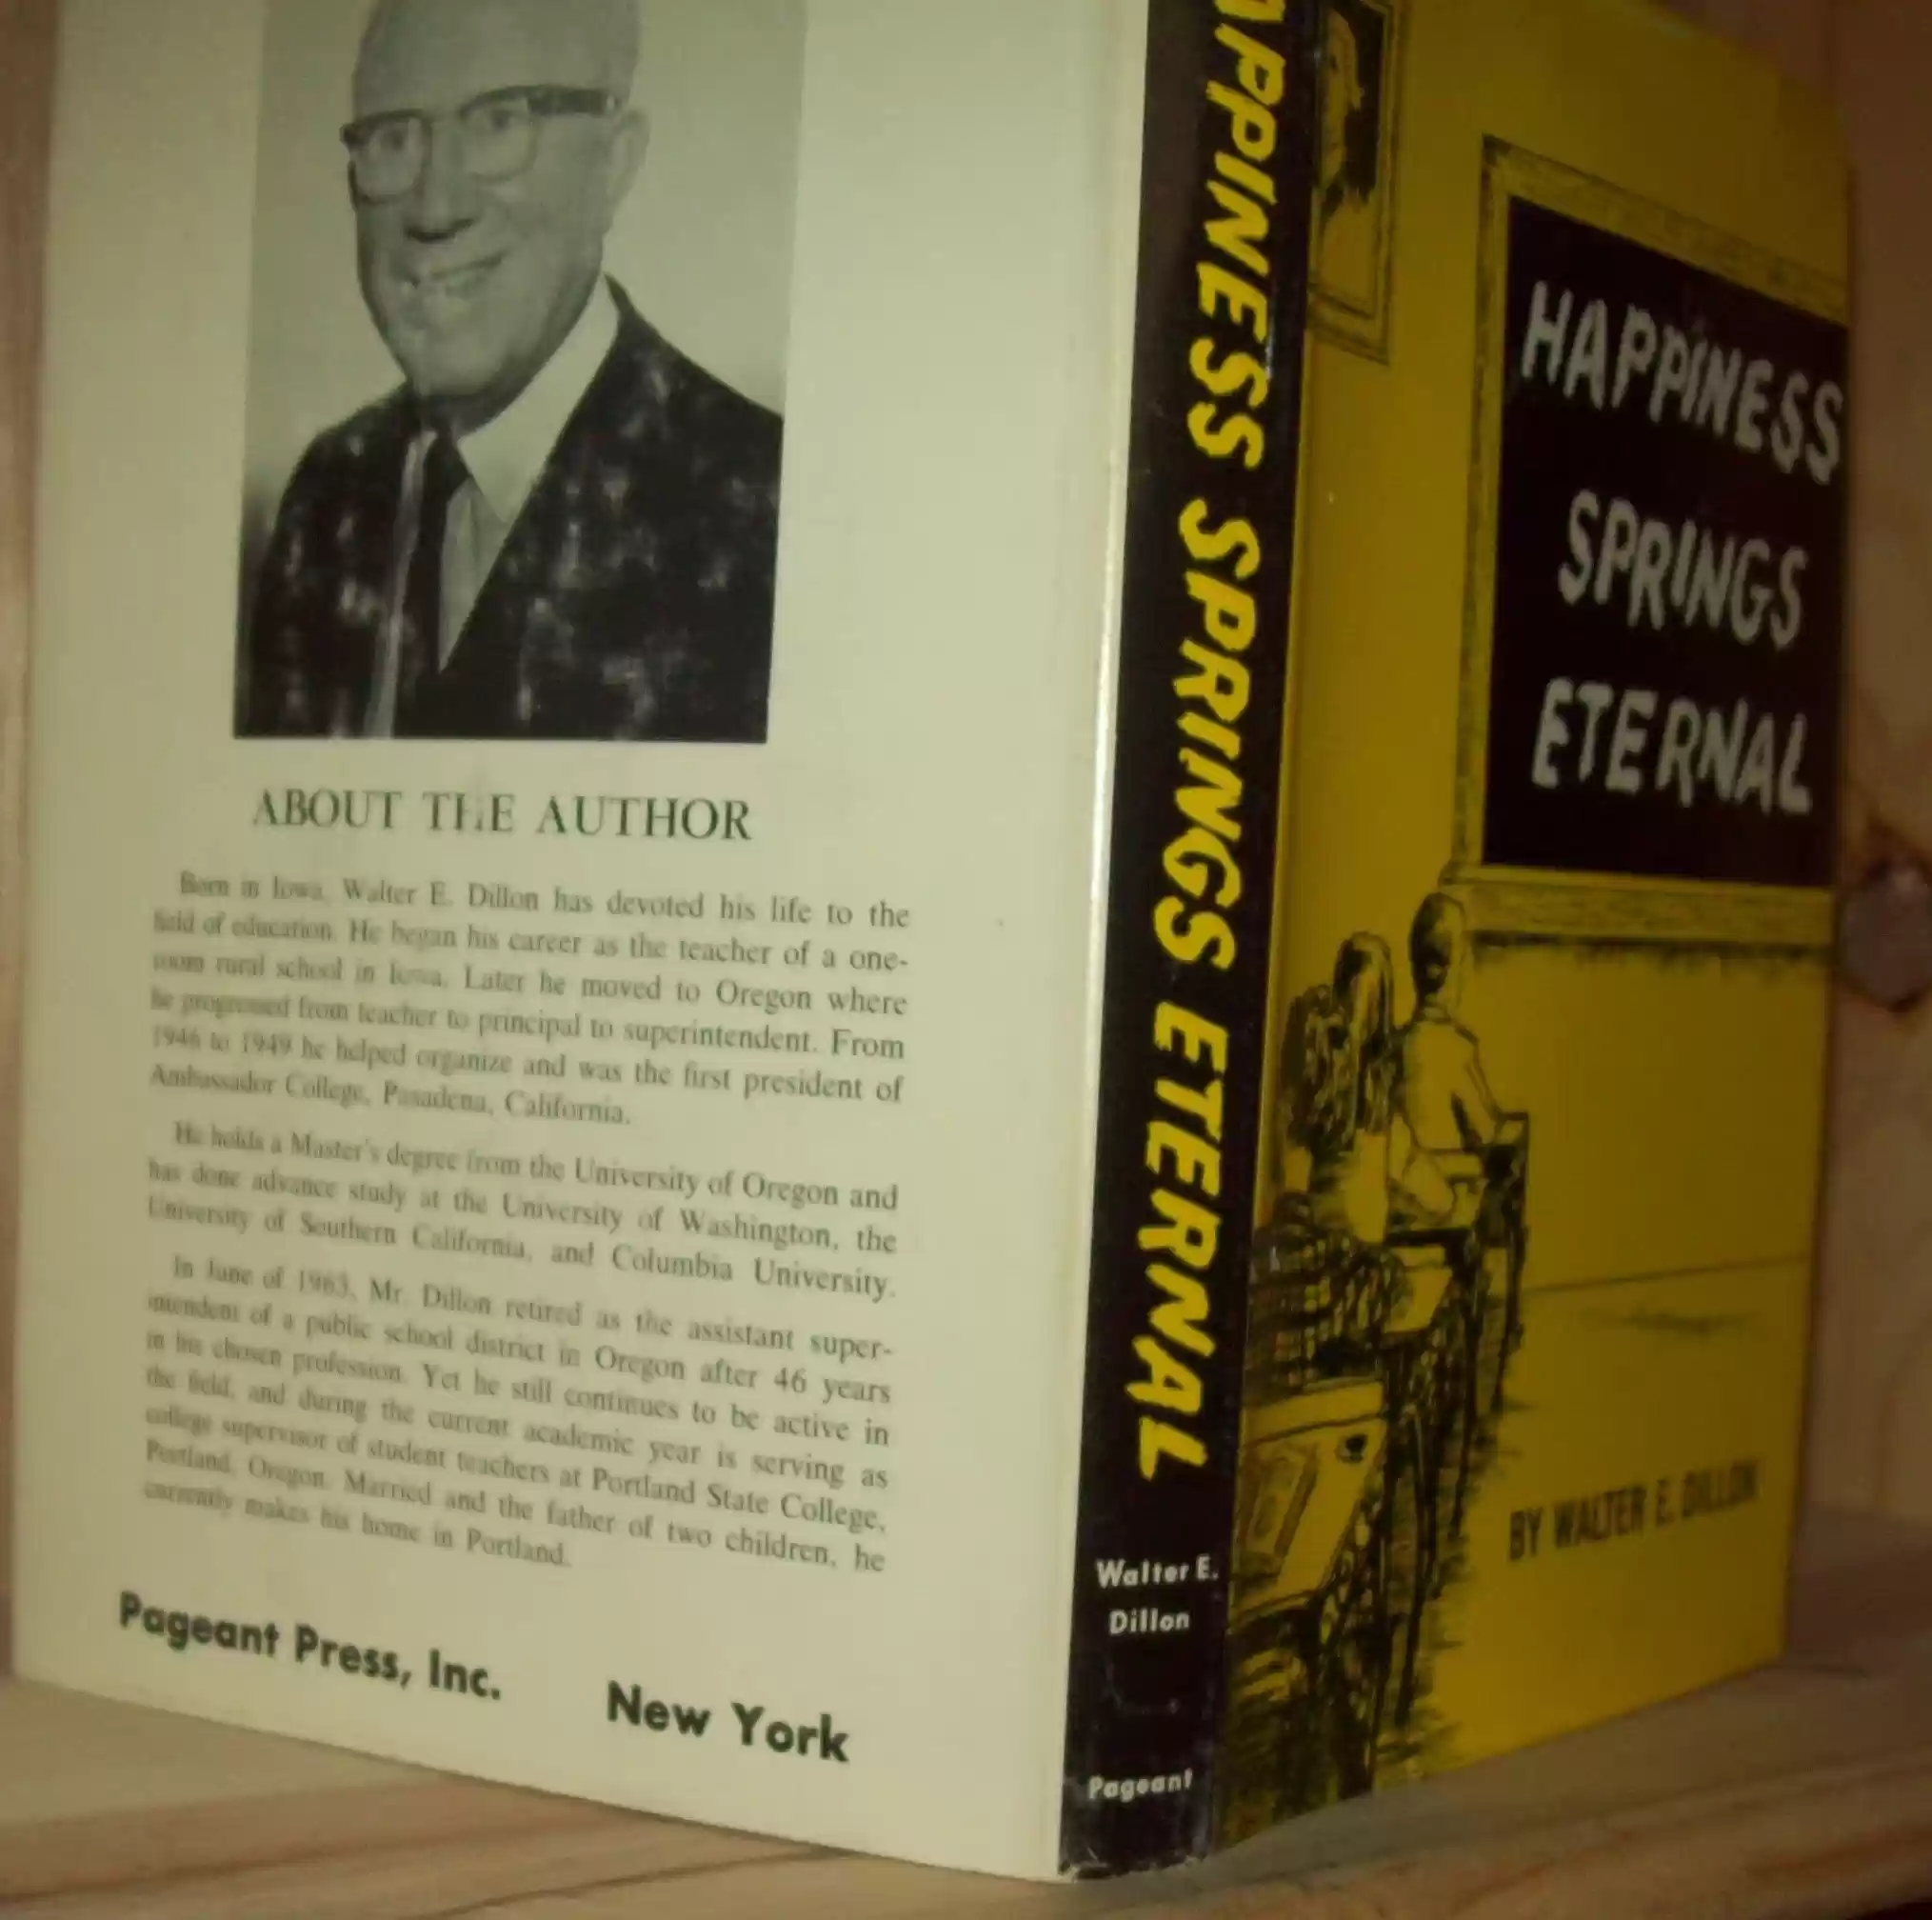 Happiness Springs Eternal by Walter Dillon7